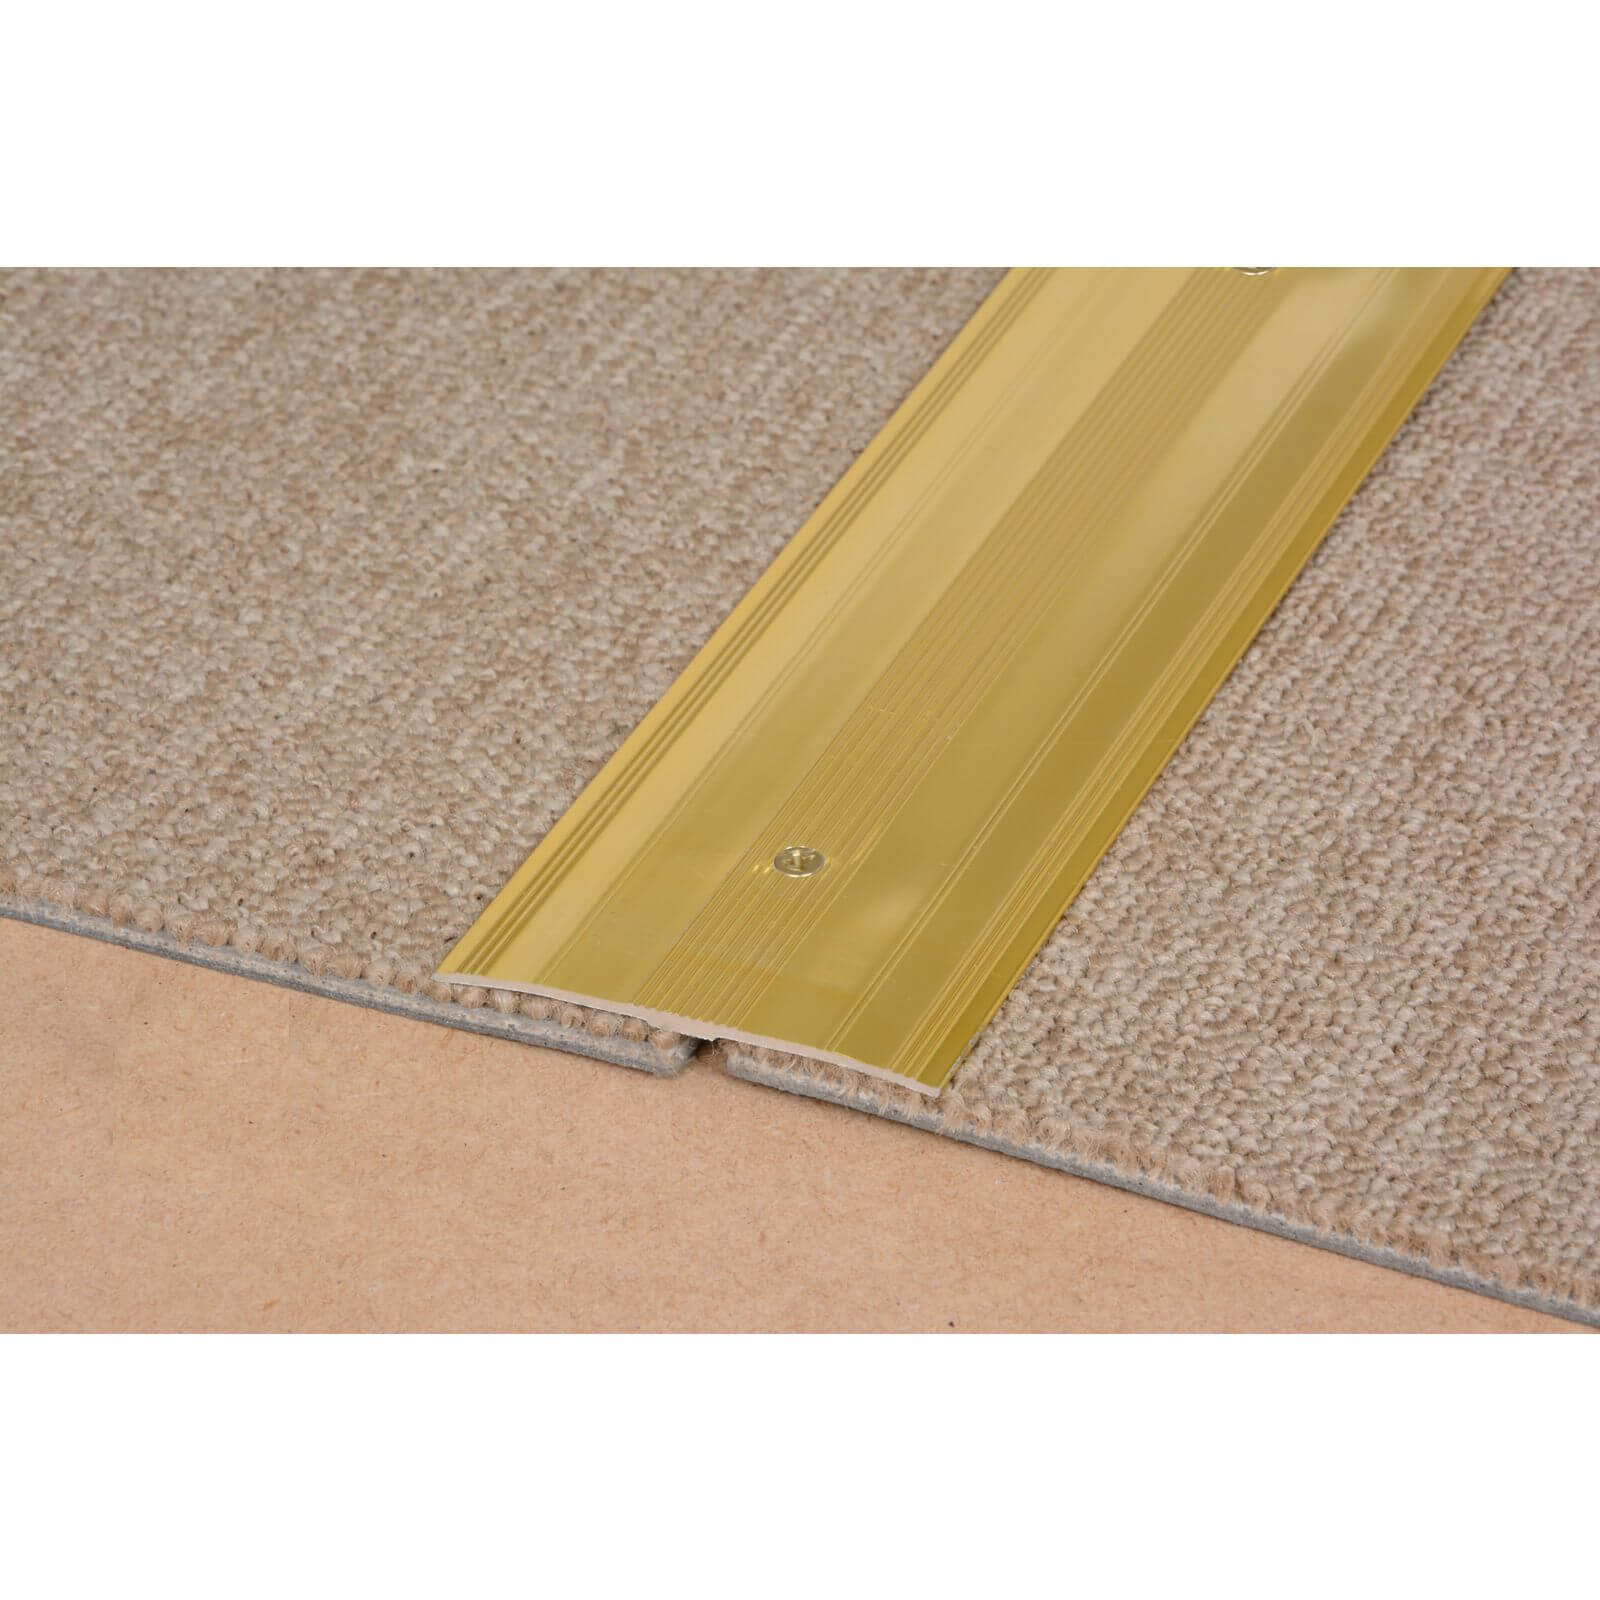 Vitrex Extra Wide Cover Strip Carpet Edge - Gold 1800mm